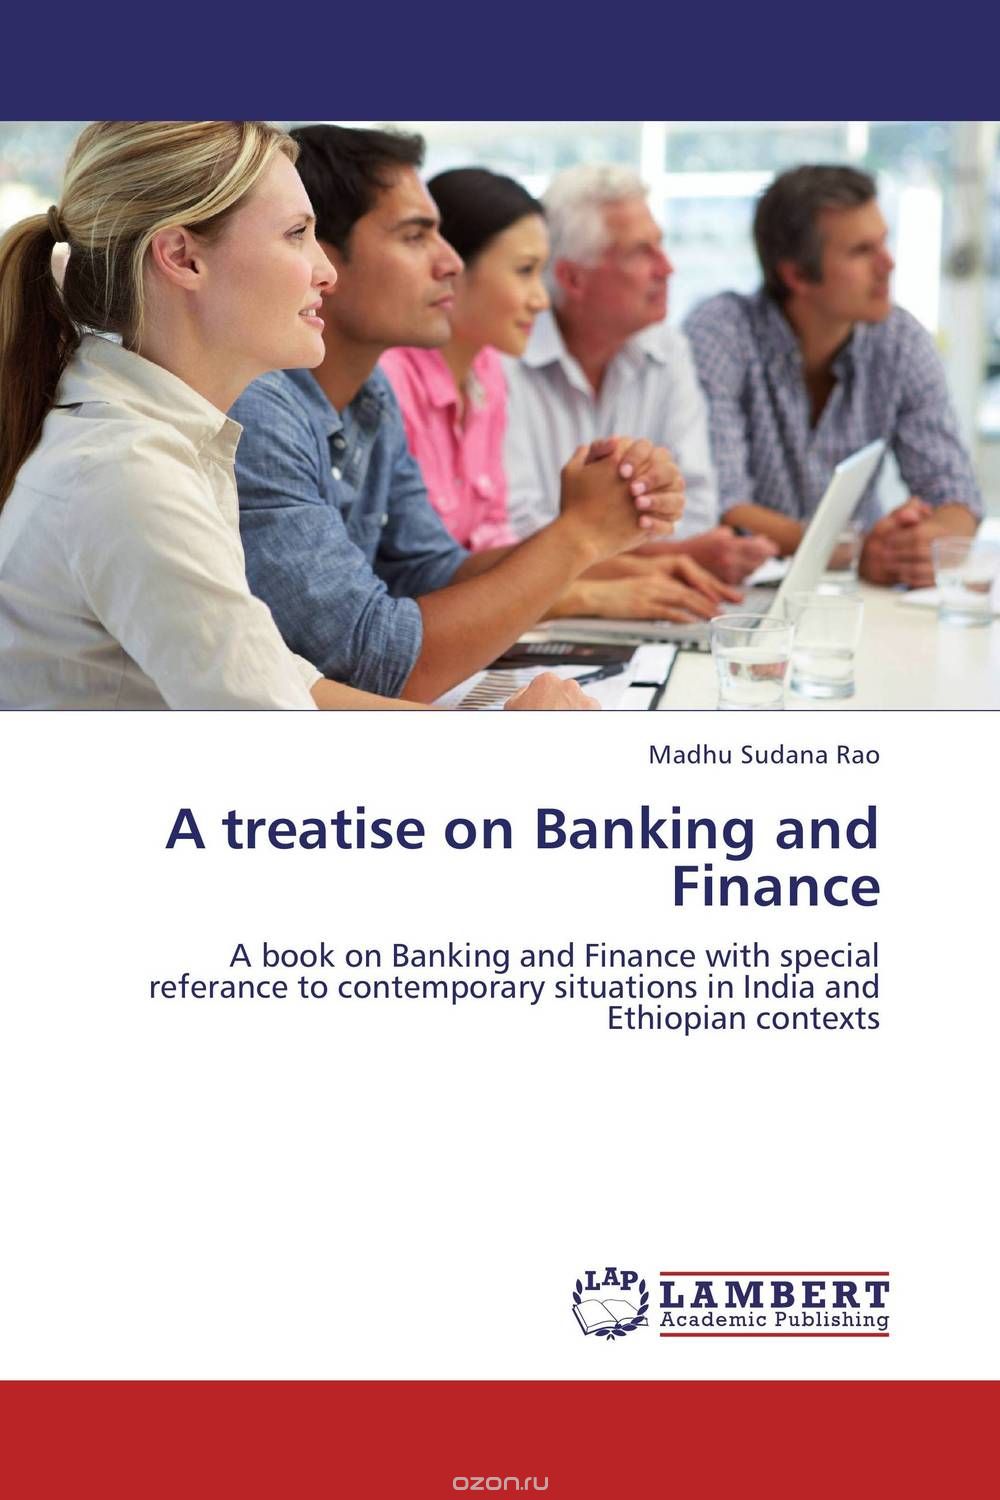 A treatise on Banking and Finance